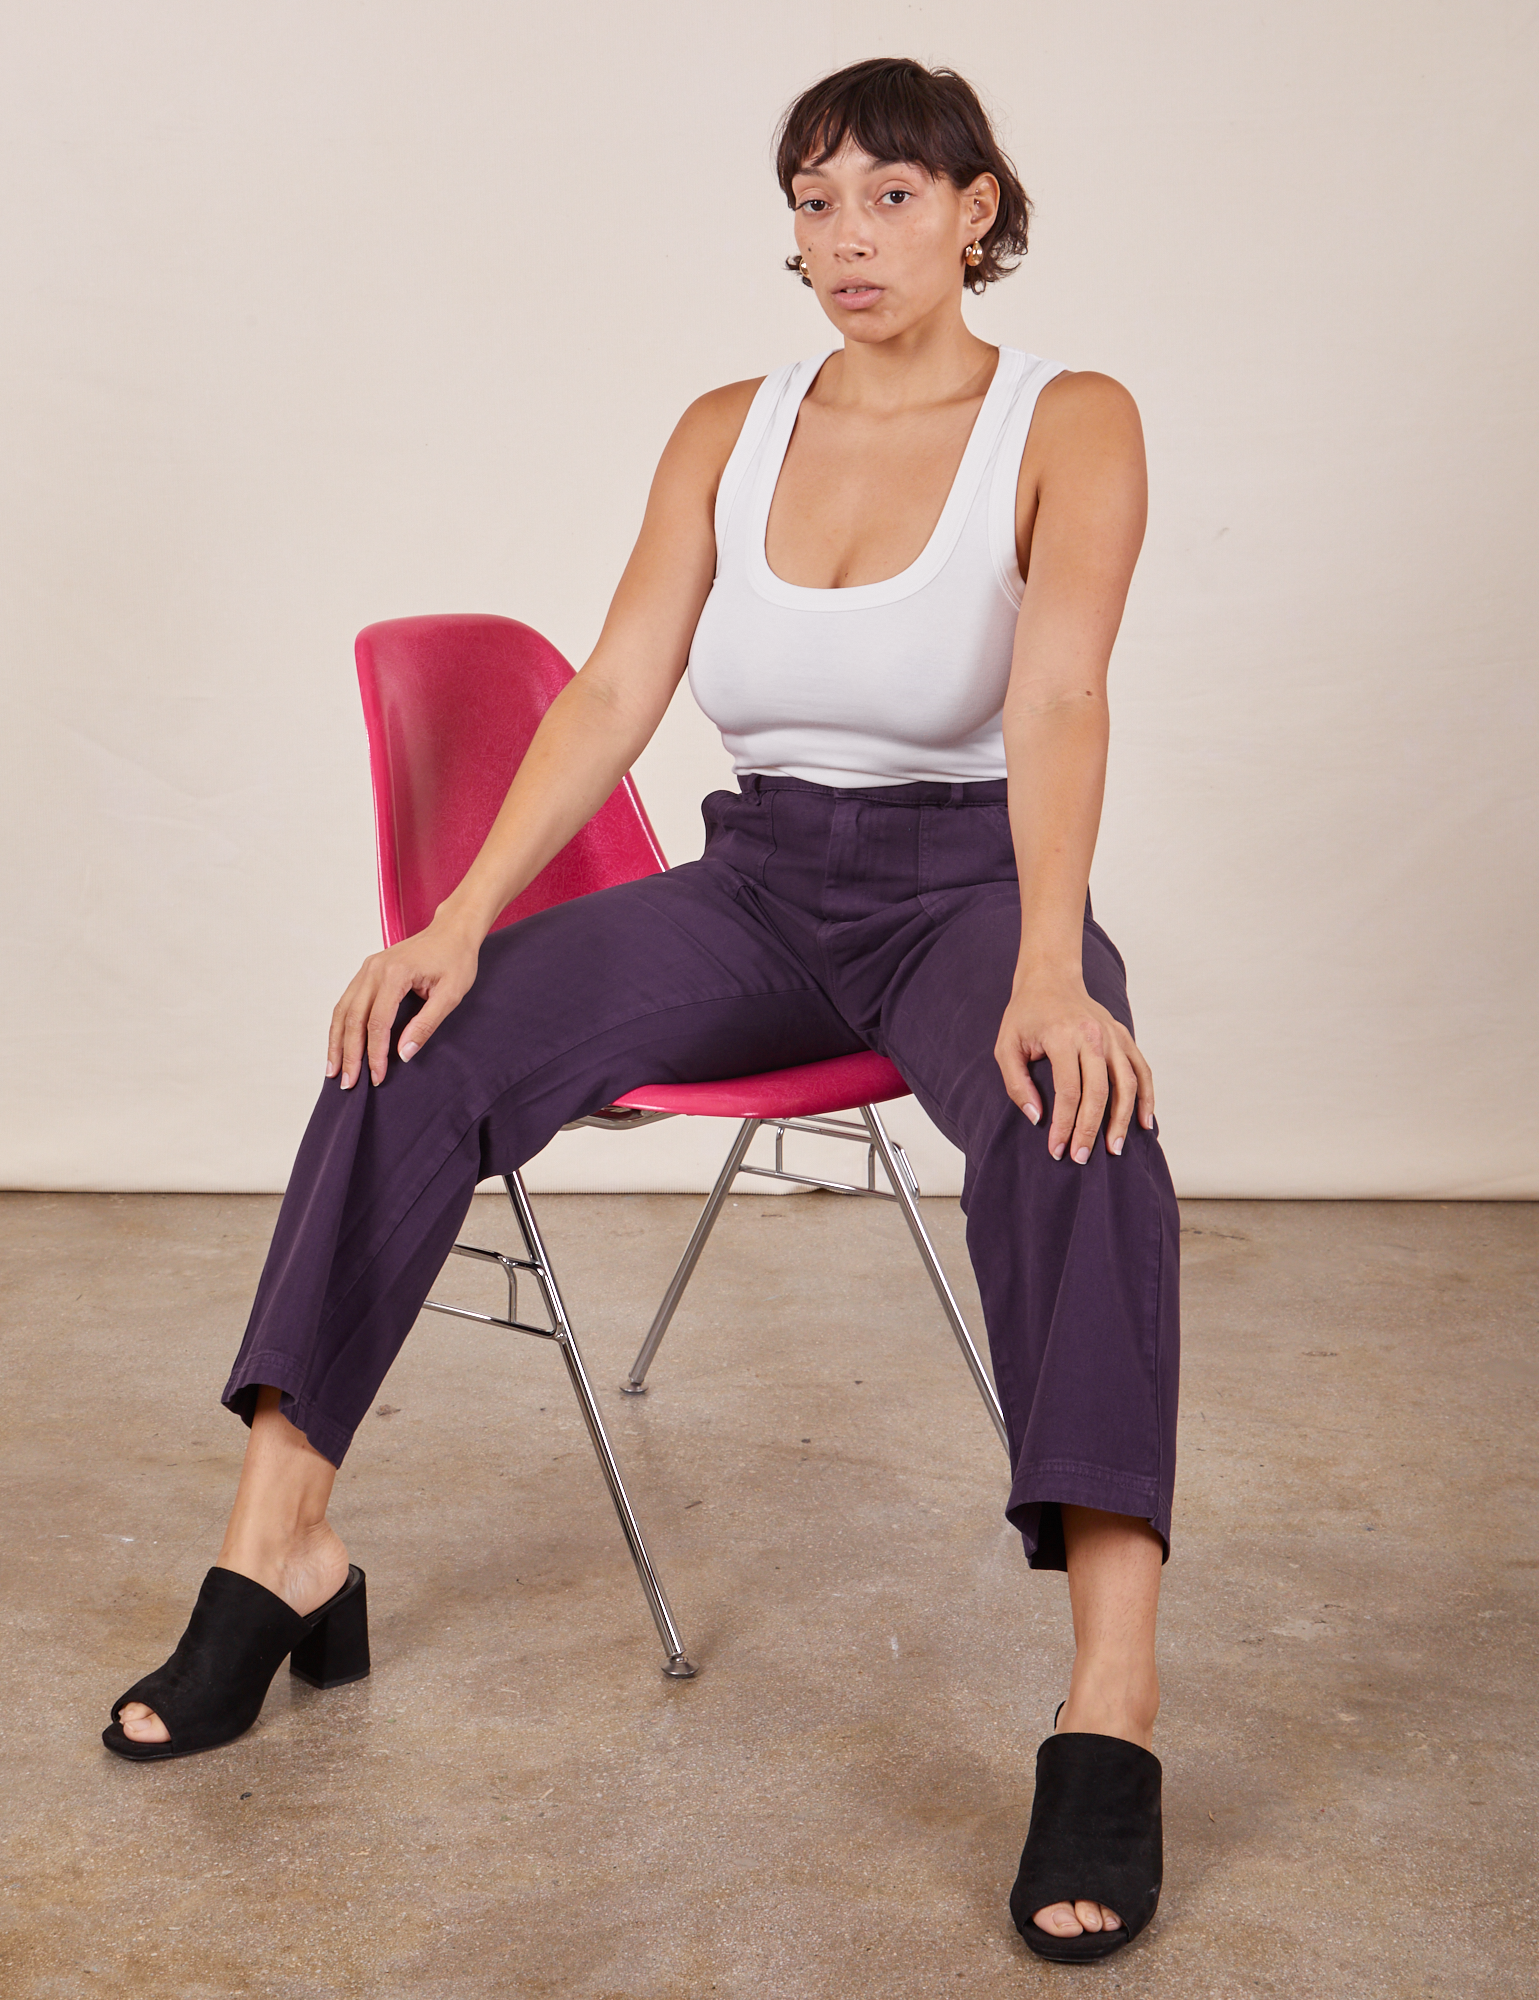 Tiara is wearing Work Pants in Nebula Purple and a vintage off-white Tank Top sitting in a pink chair